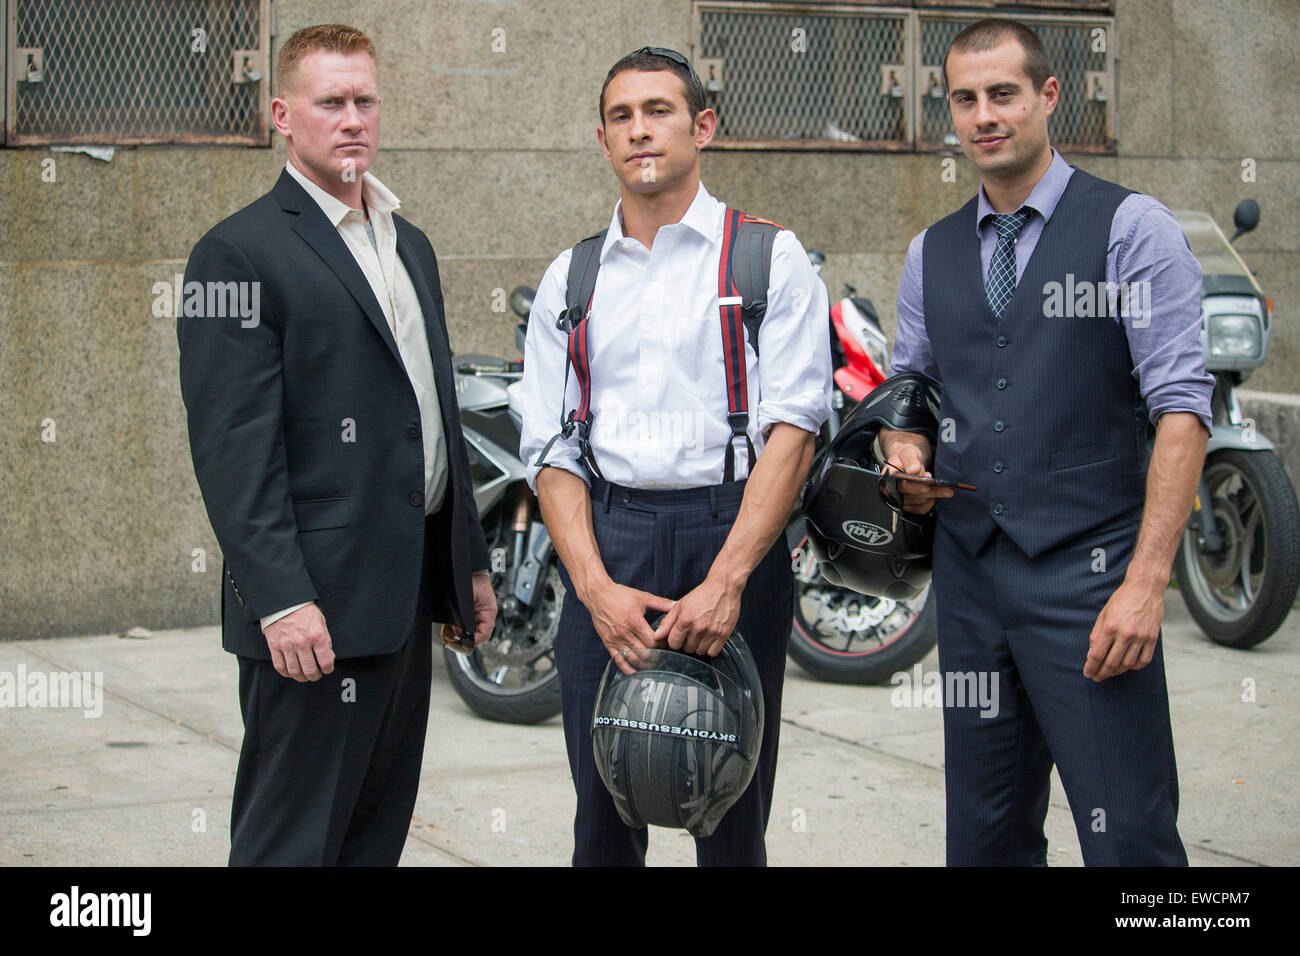 New York, New York, USA. 22nd June, 2015. Marko Markovich, right, Andrew  Rossig, center, and James Brady were convicted on Reckless Endangerment in  the Second Degree, Base Jumping and Reckless Endangerment of